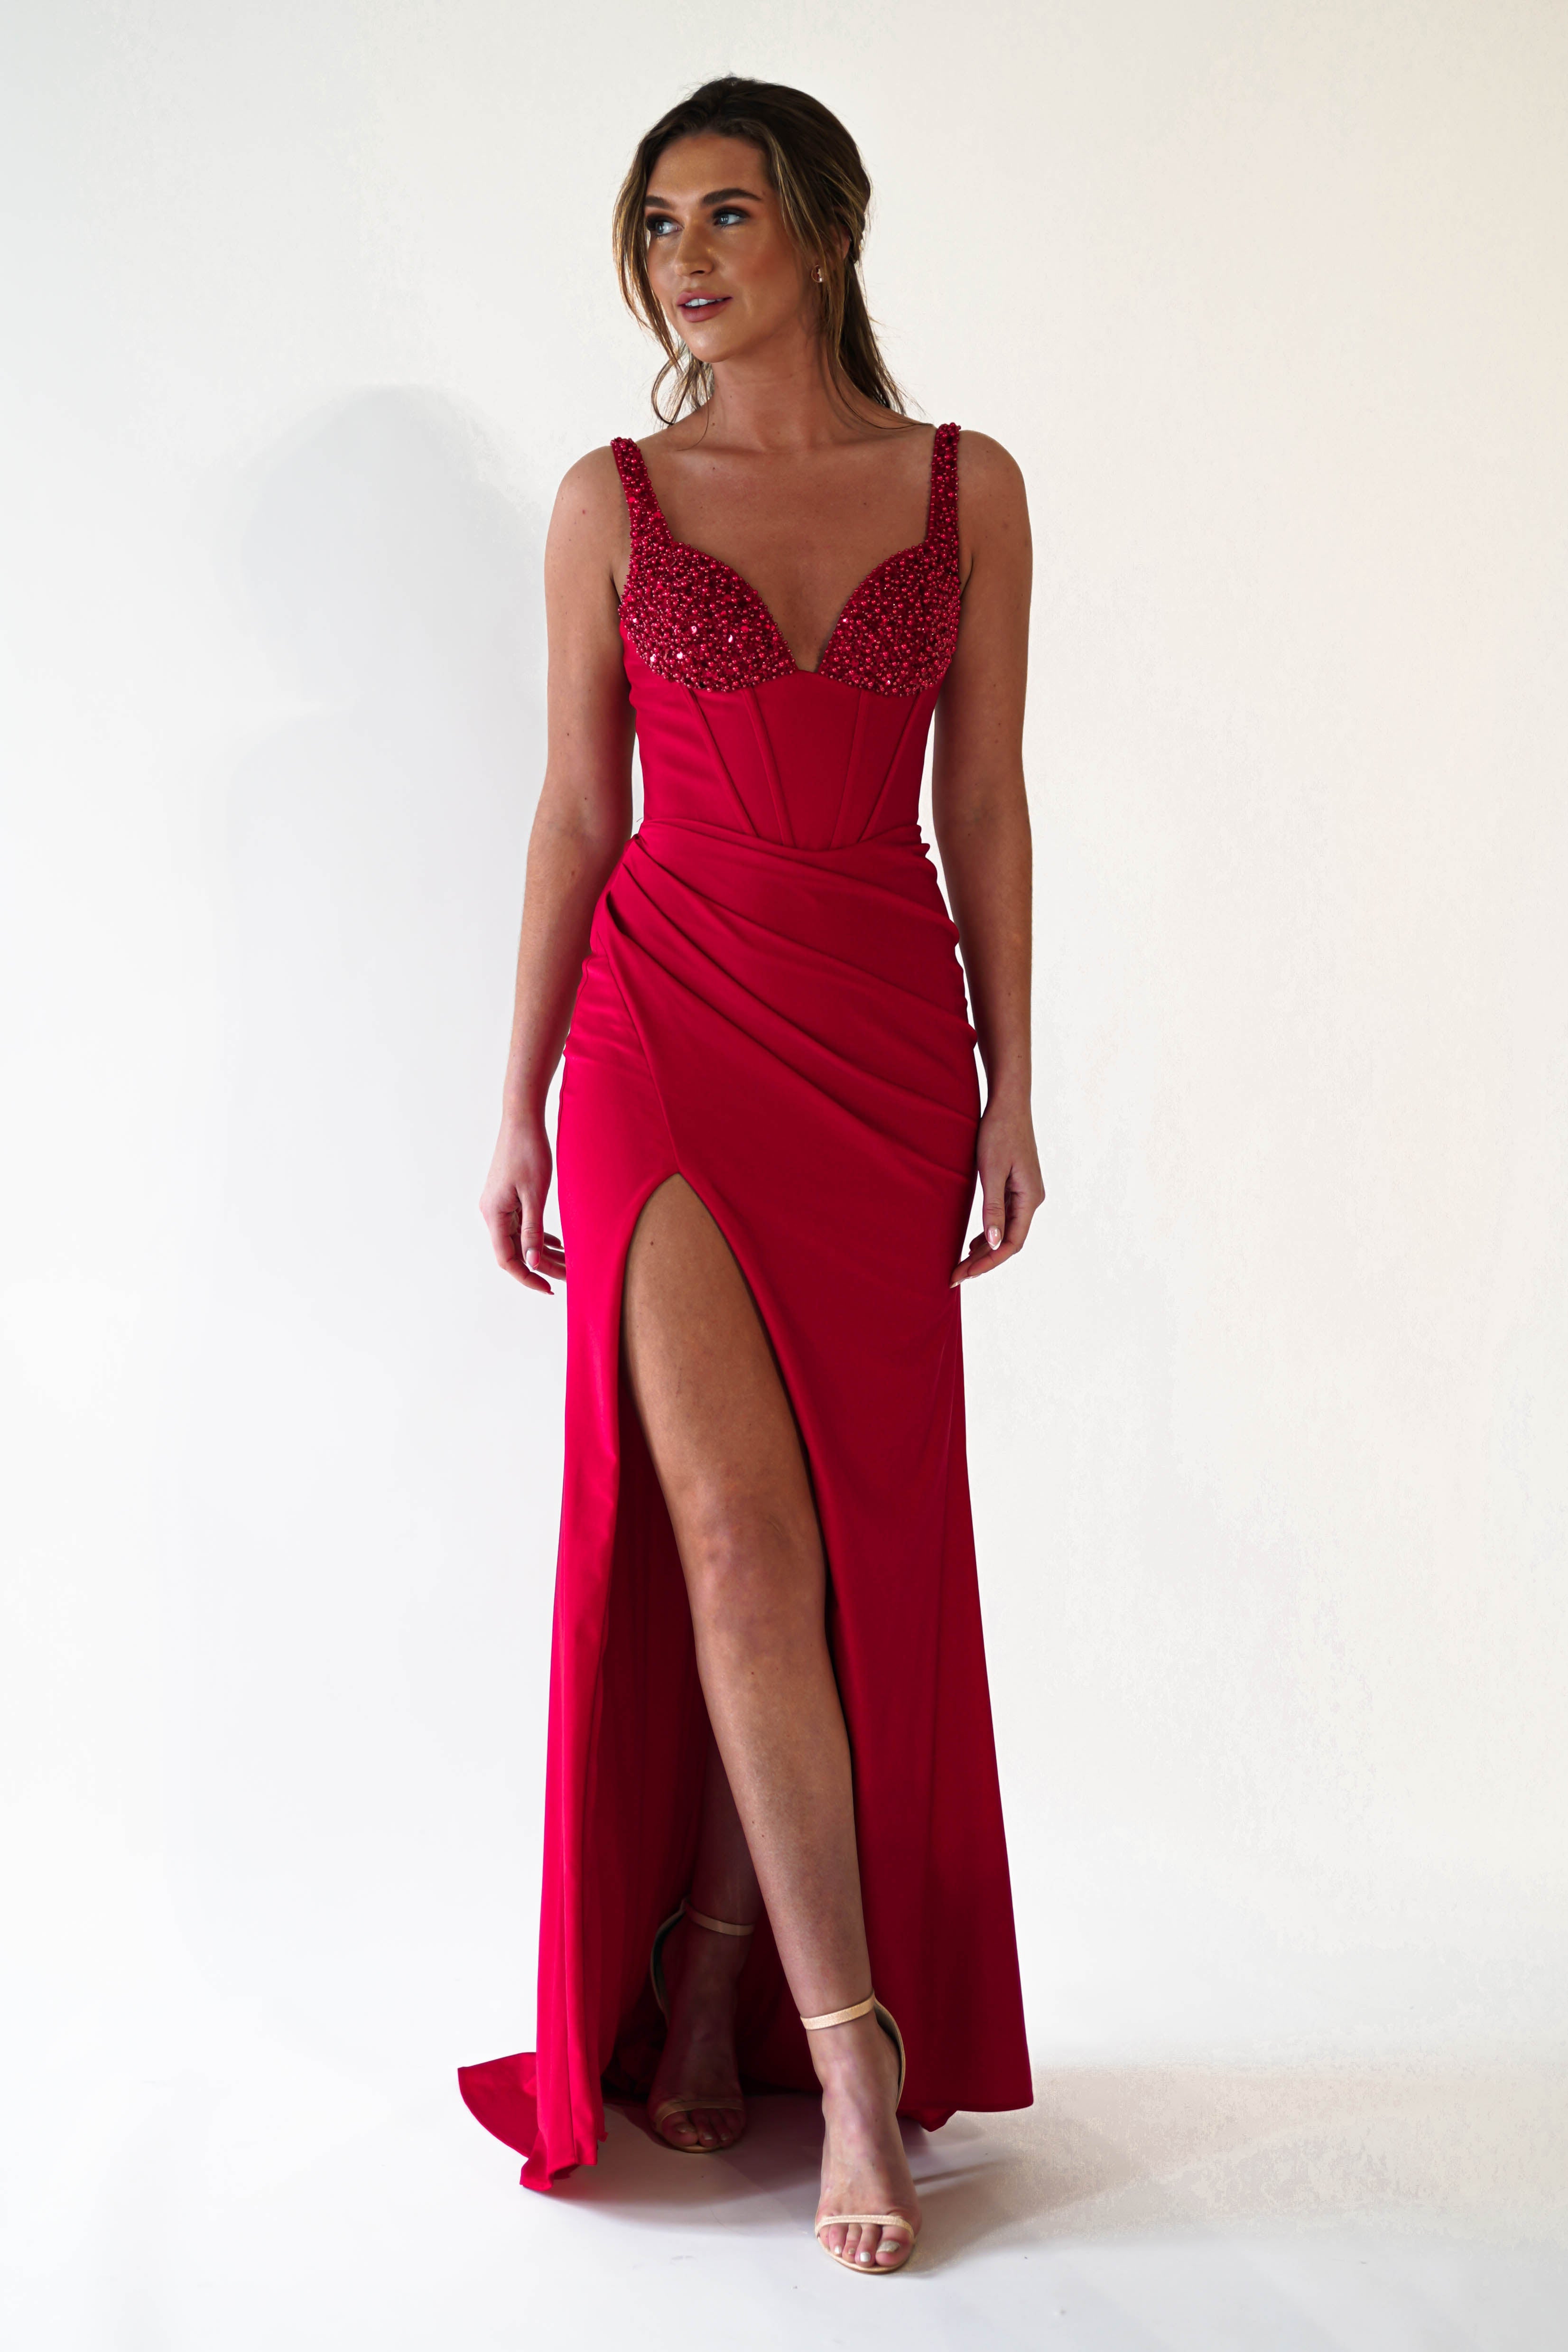 done-cd0231-red-corset-gown-with-pearl-straps-cups-red-cind-dresses-52732570927445.jpg